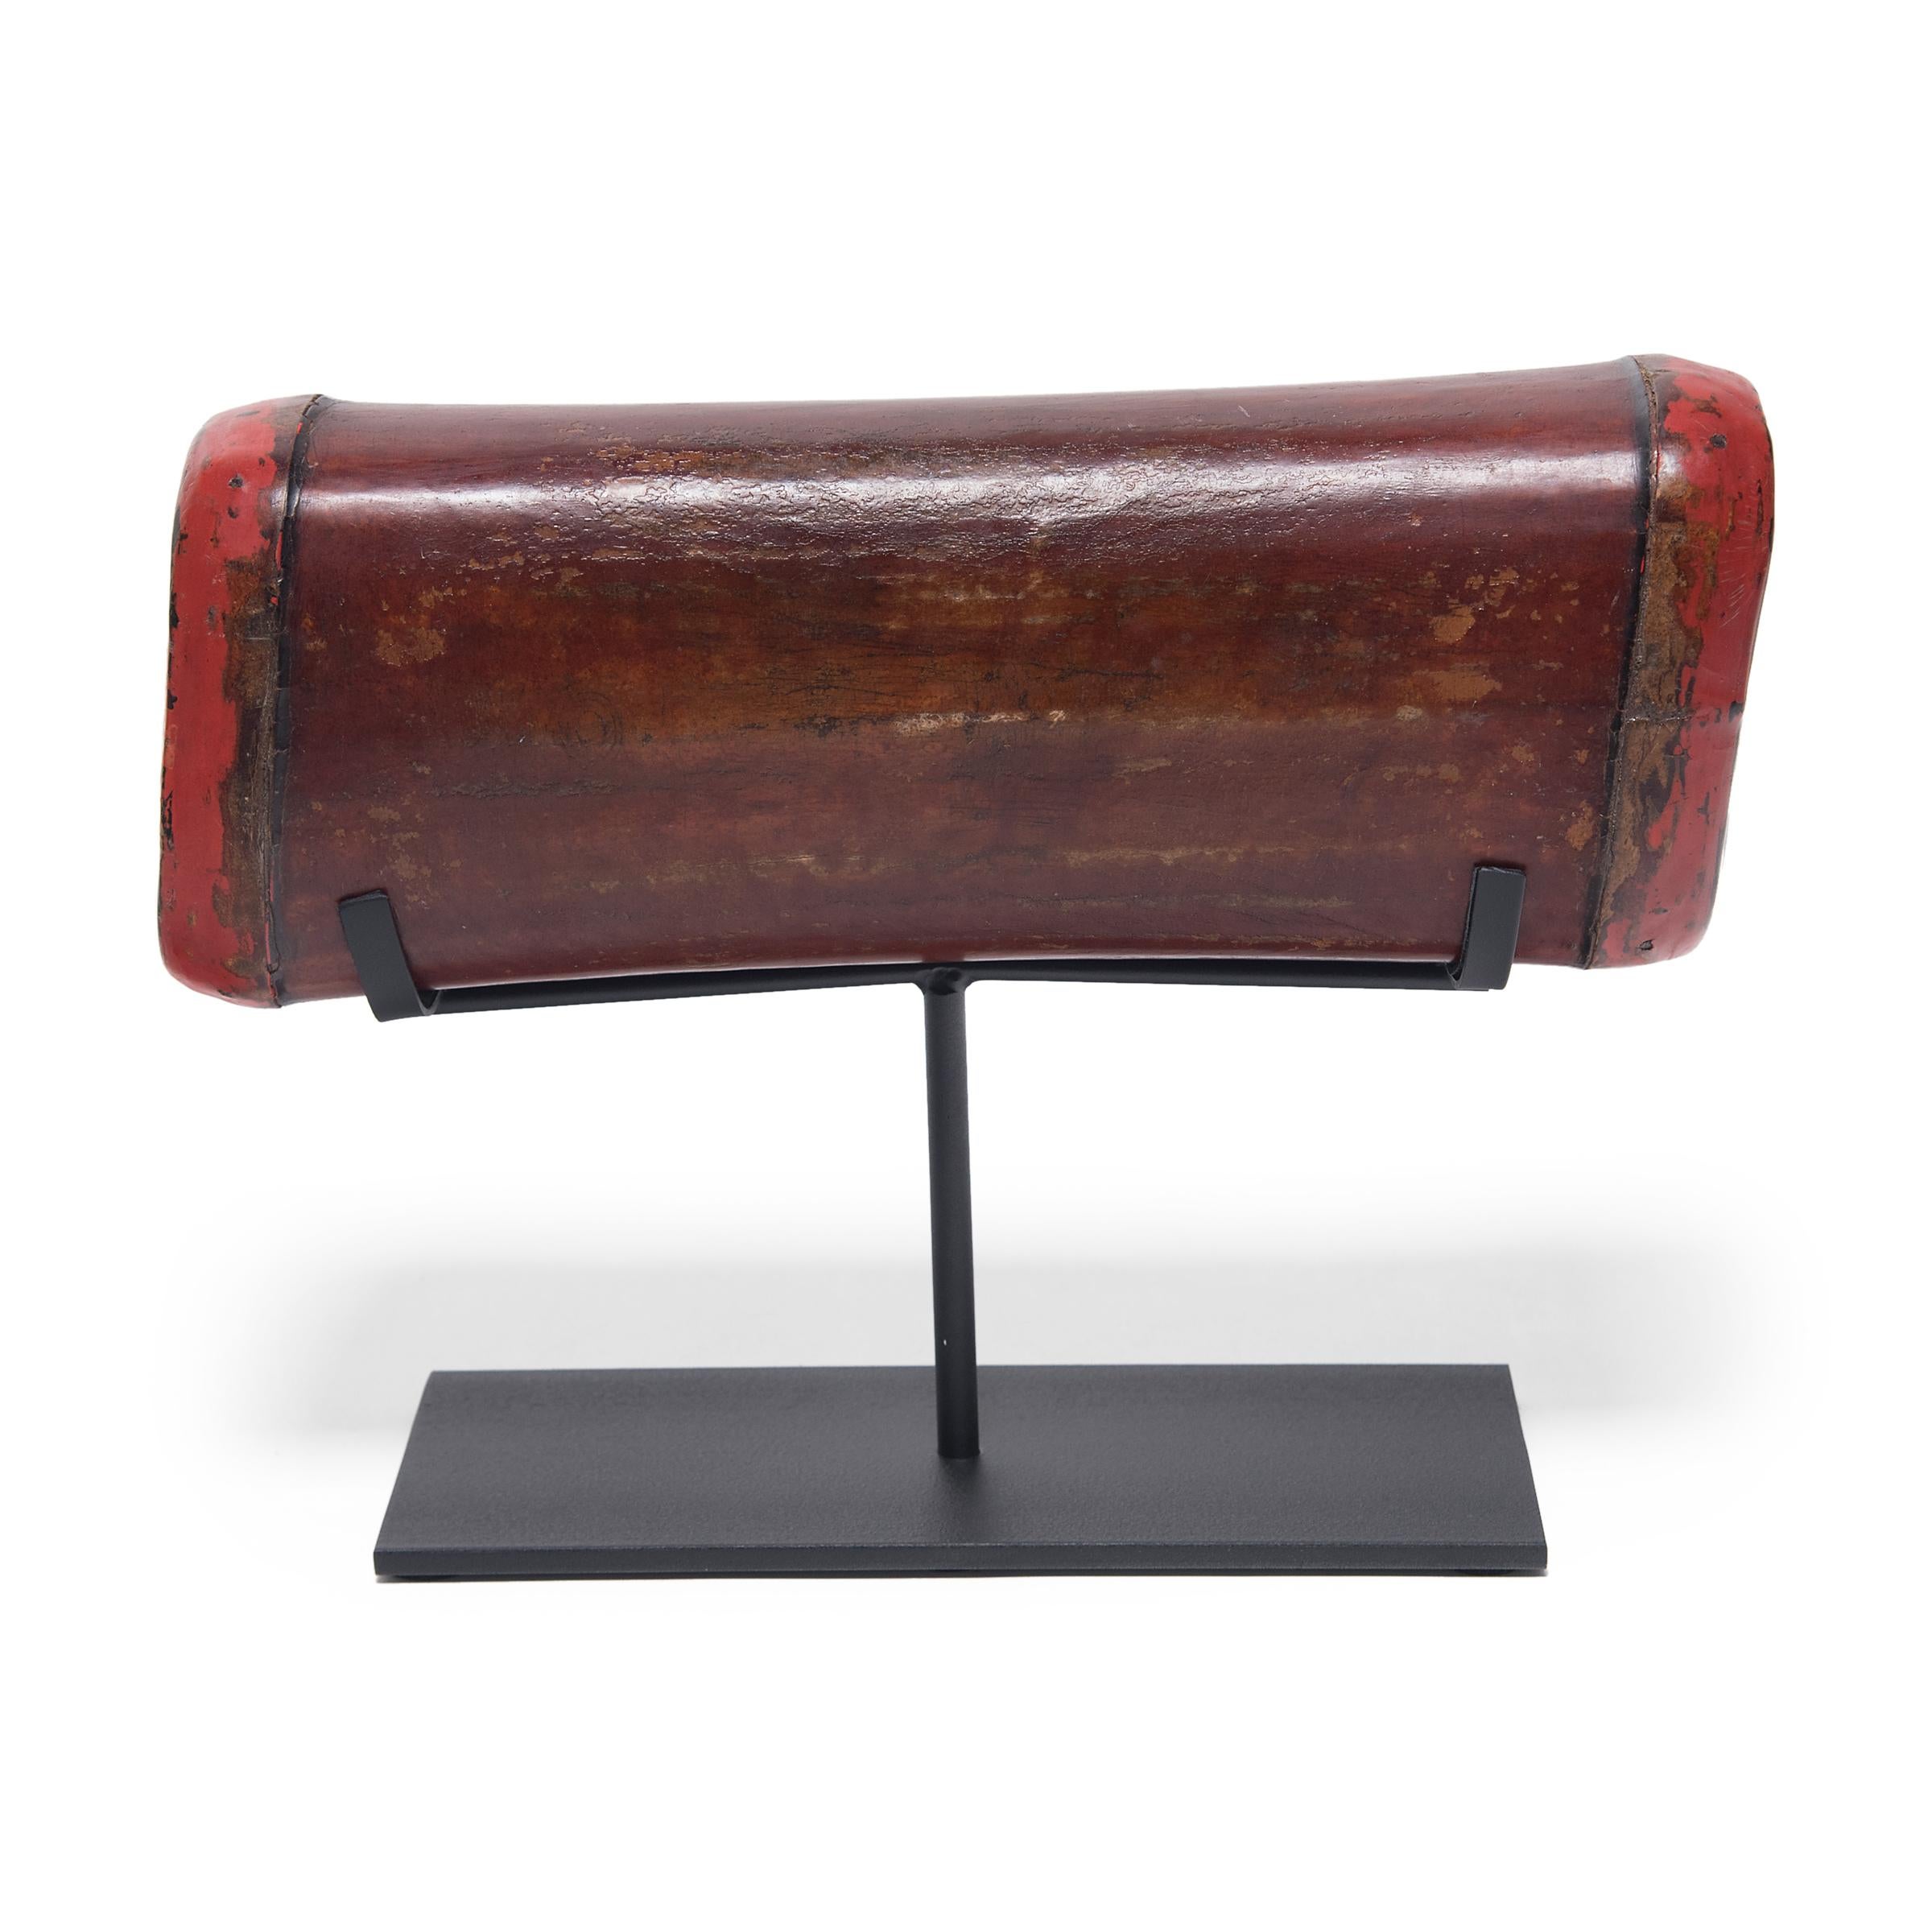 Lacquered Chinese Red Lacquer Hide Headrest, circa 1850 For Sale